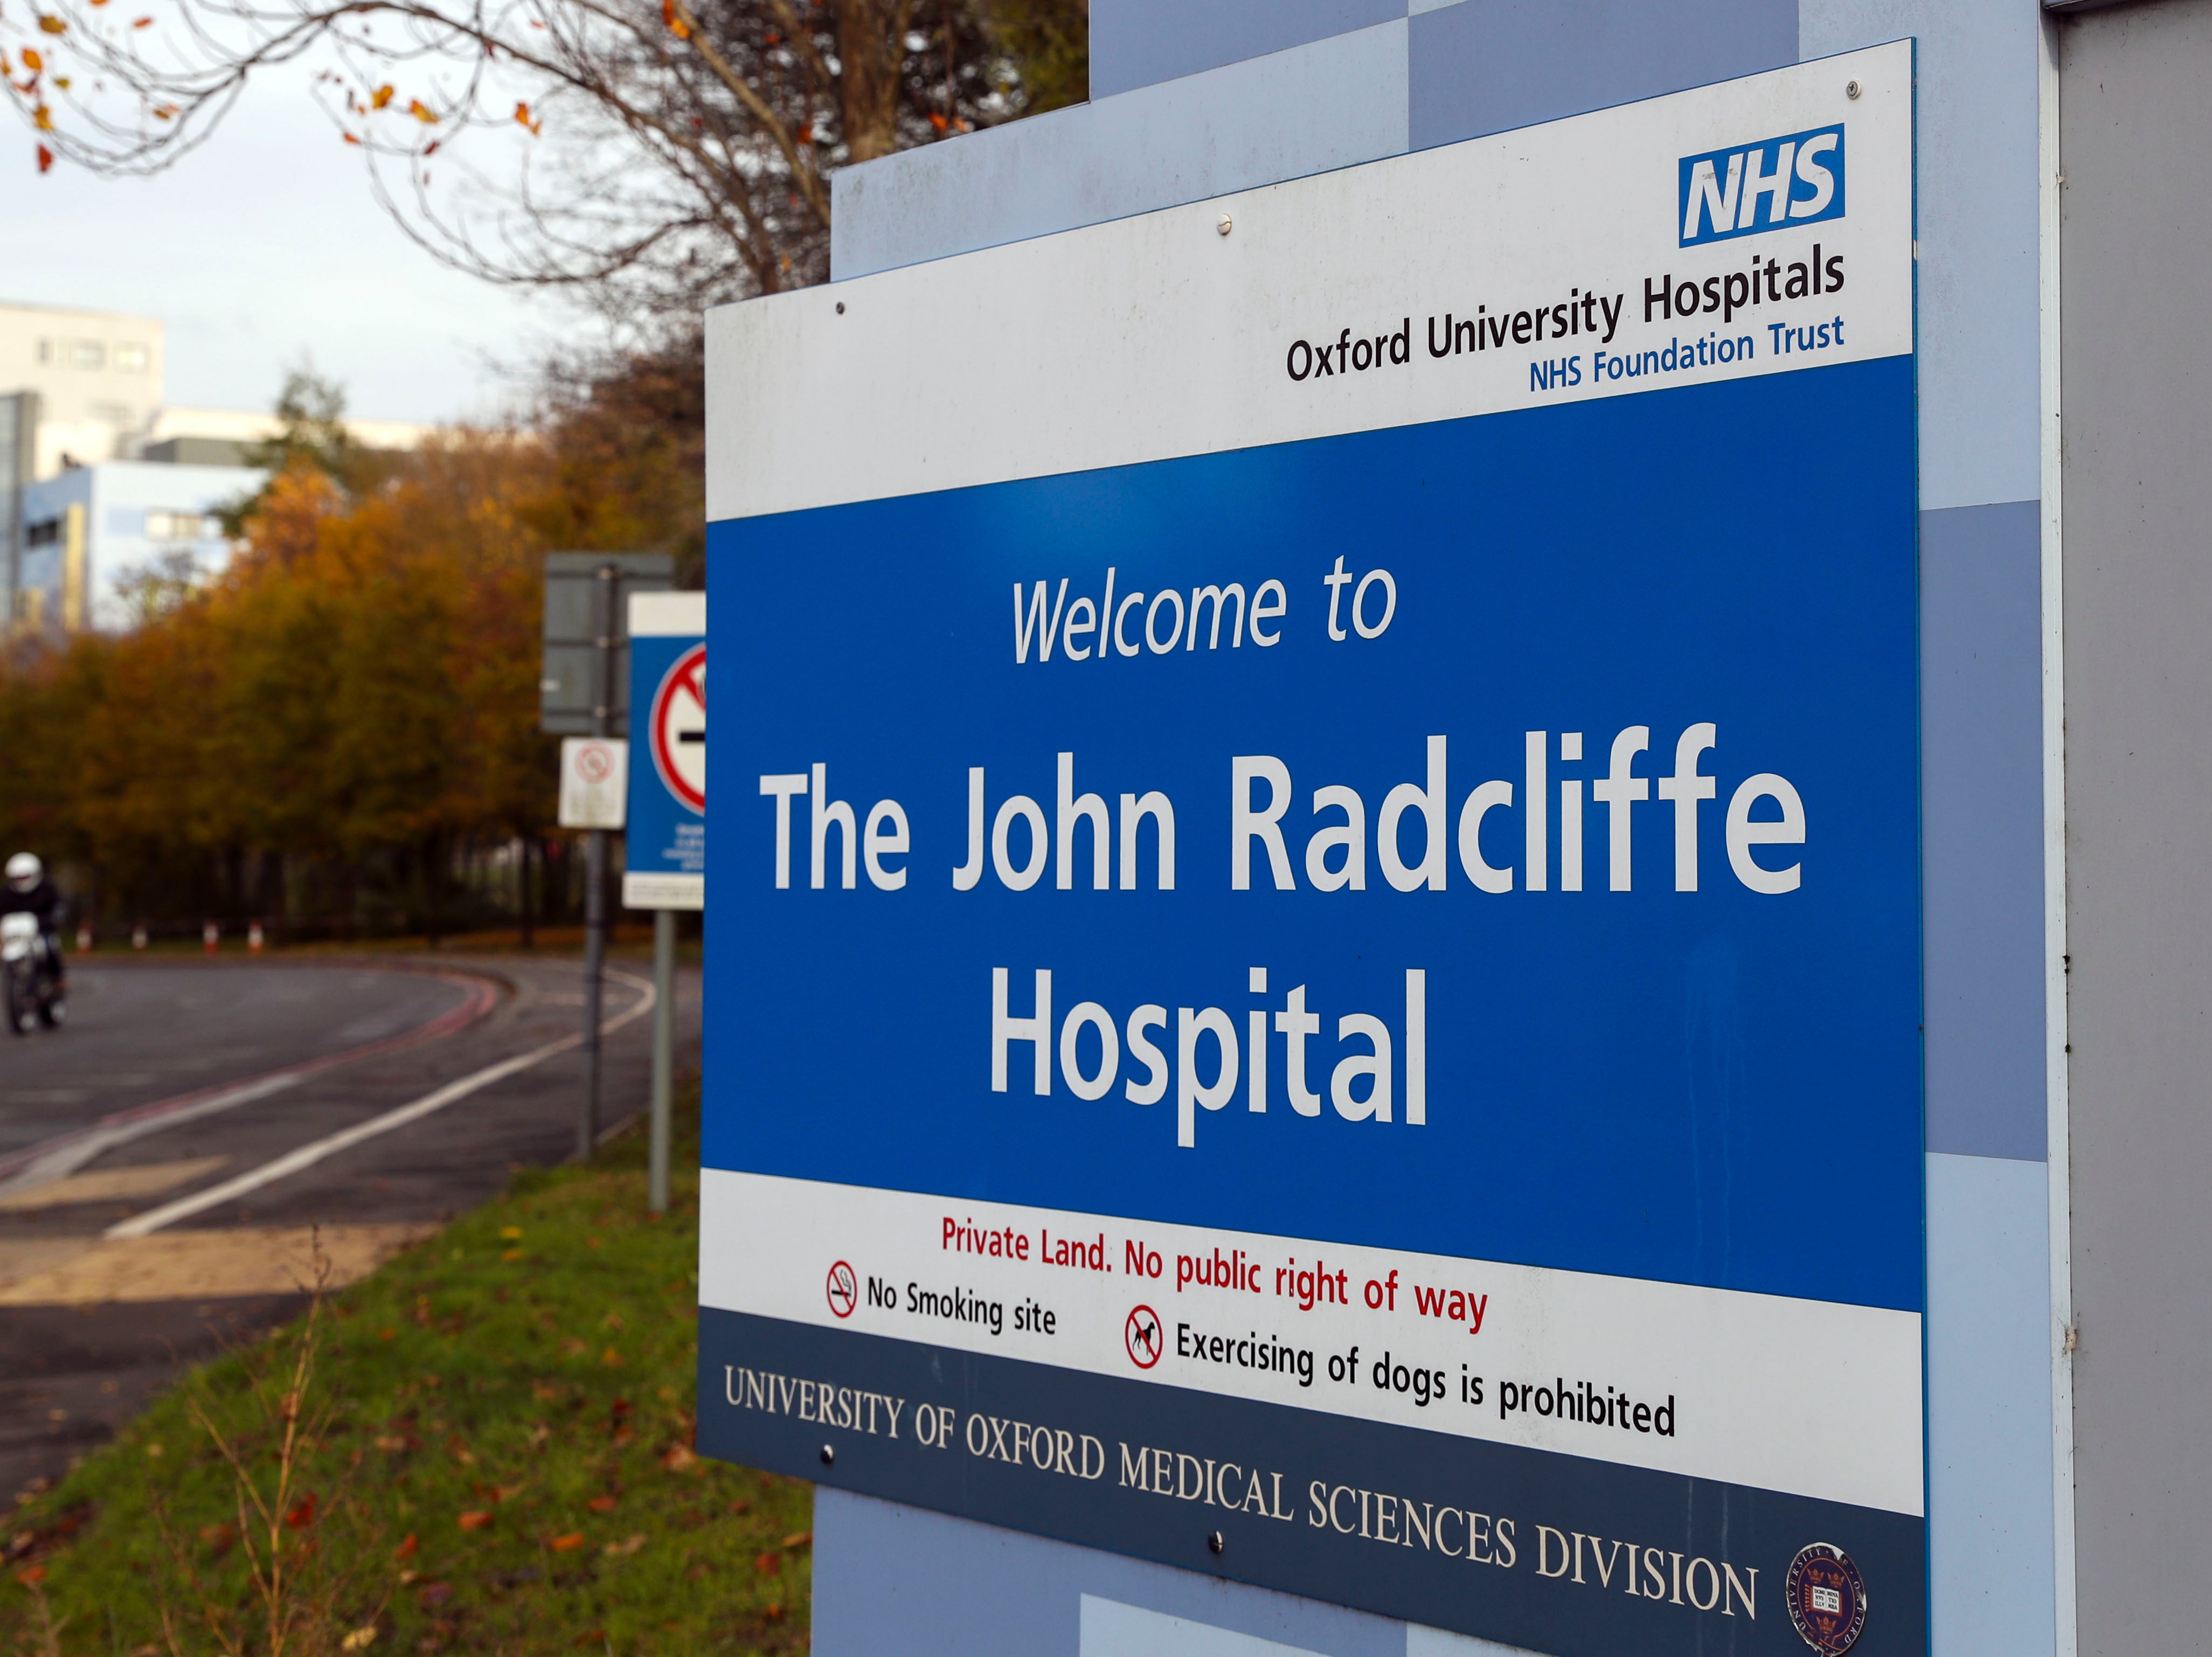 Body cameras will be worn by trained staff at John Radcliffe Hospital, in Oxford, as part of a trial following a rise in acts of aggression